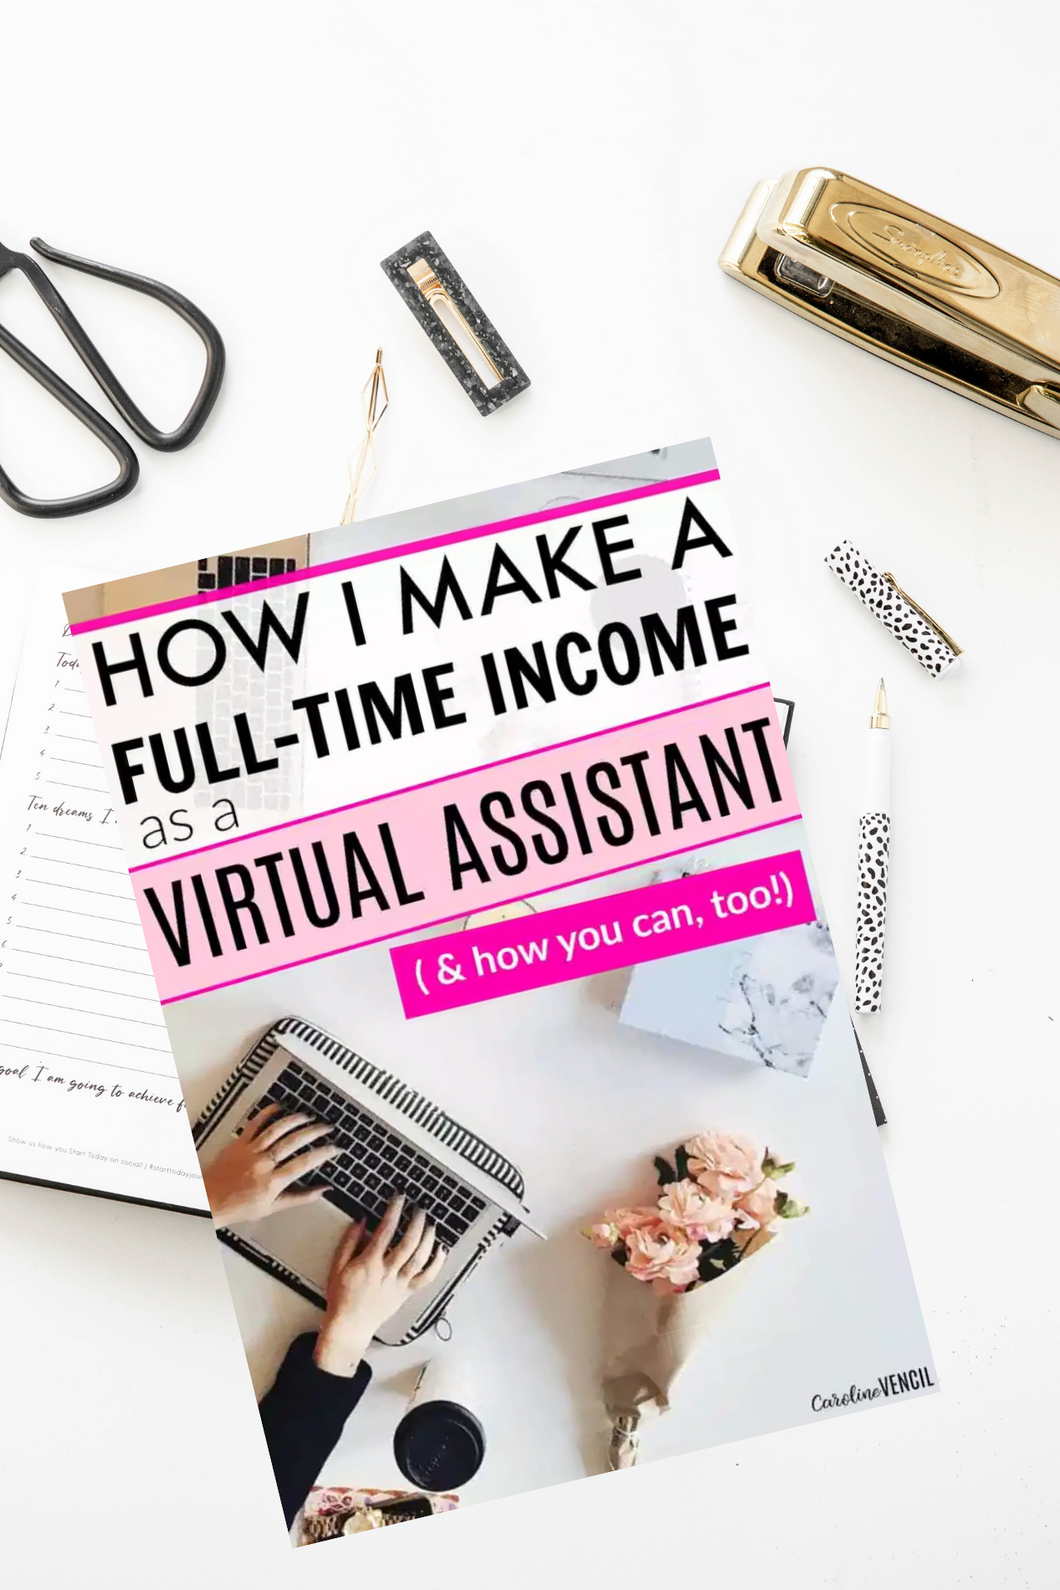 How to Become a Virtual Assistant and Make a Full-Time Income Doing It!